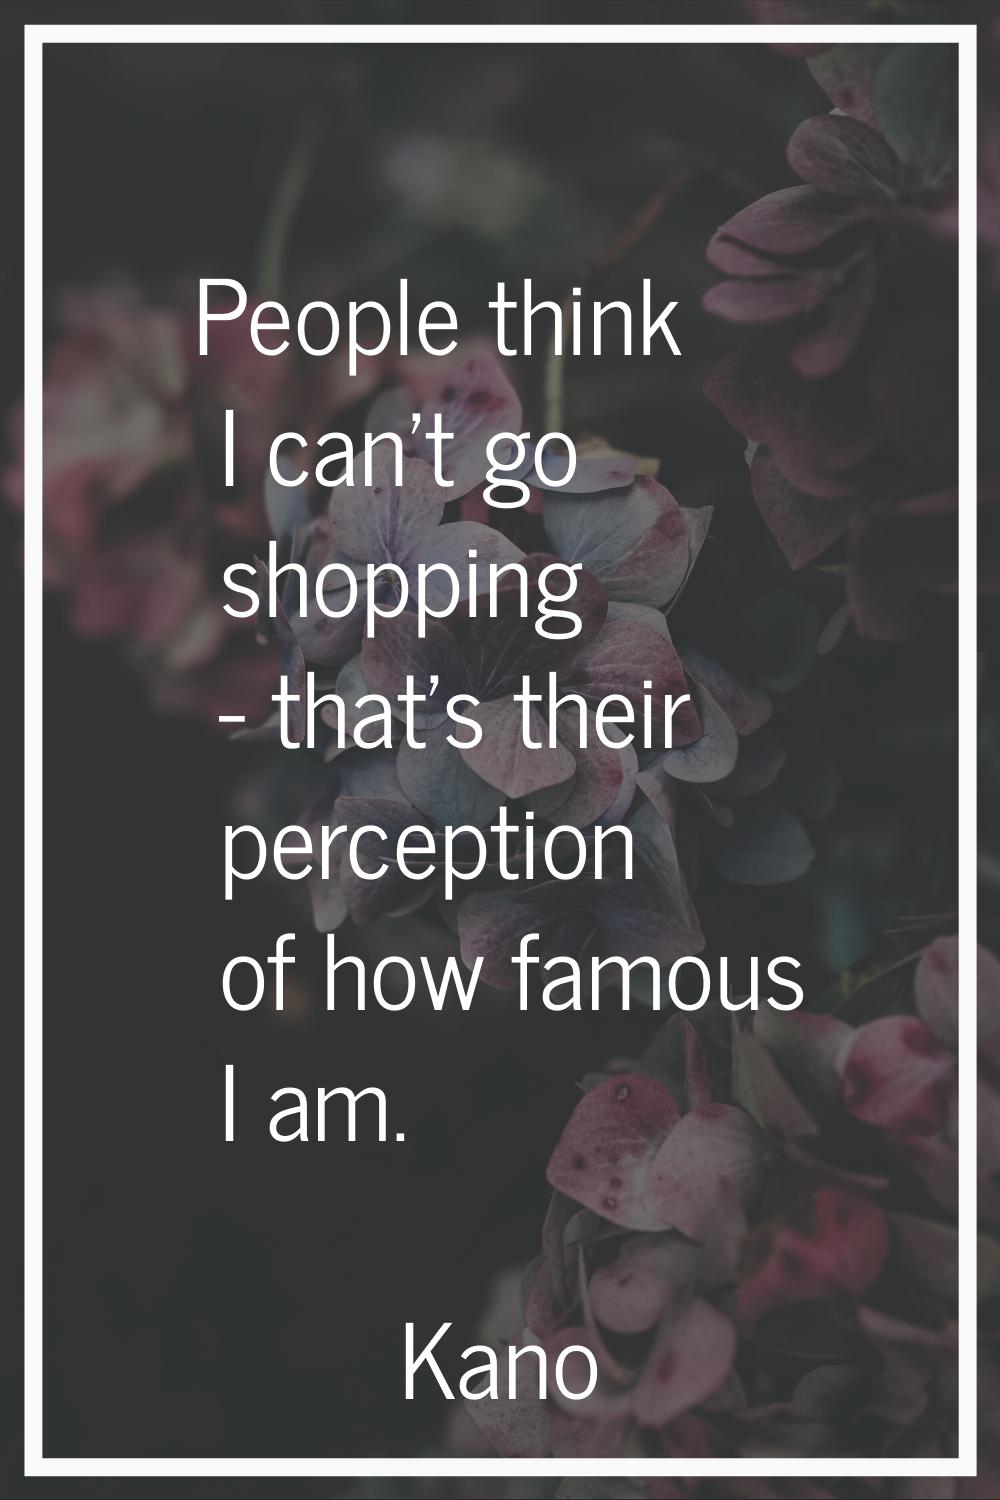 People think I can't go shopping - that's their perception of how famous I am.